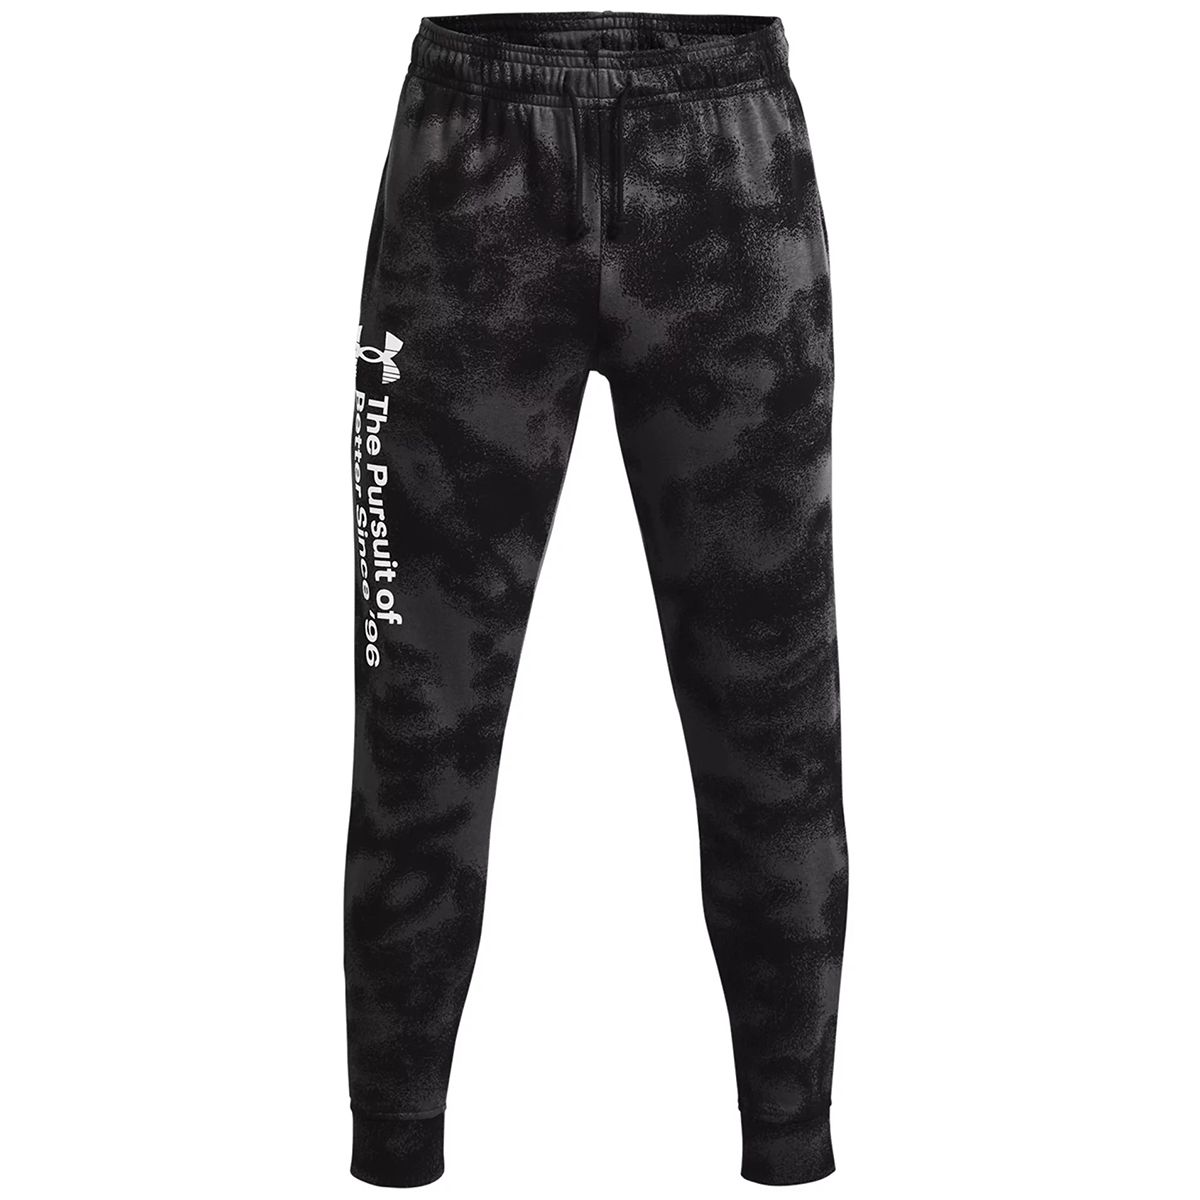 UNDER ARMOUR Men's CoolSwitch Compression Leggings - Bob's Stores